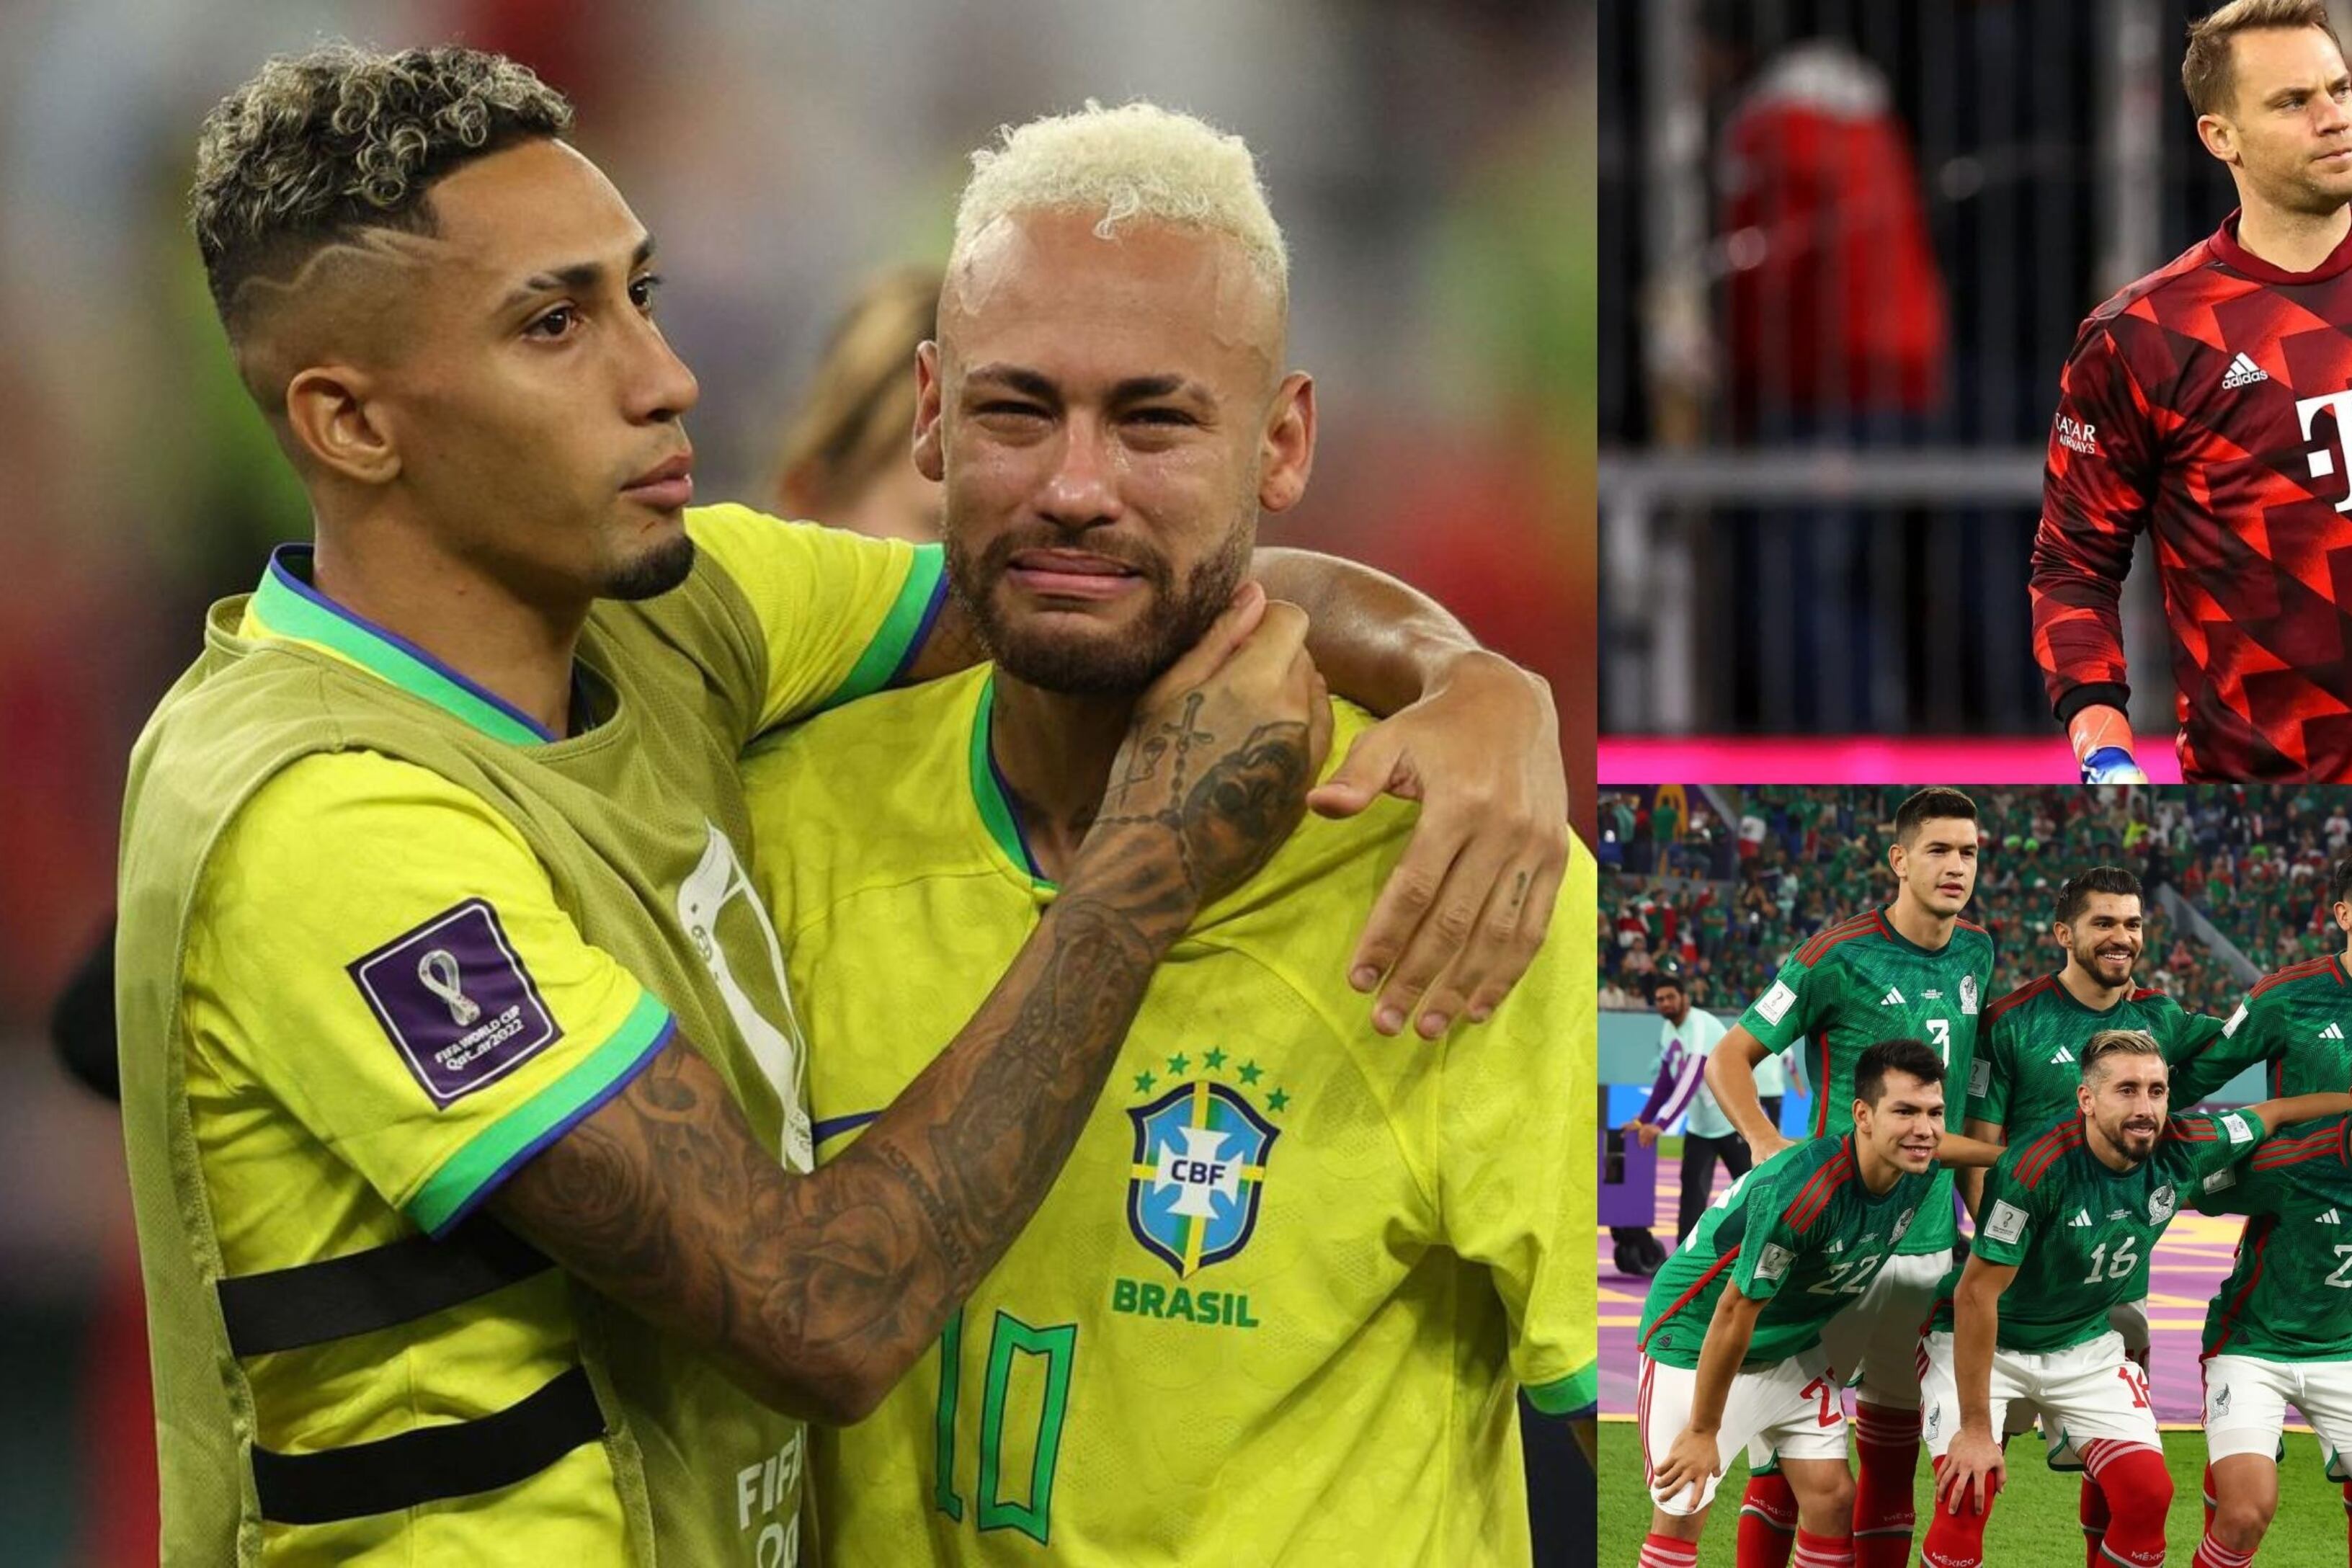 He made Neymar cry with El Tri, he humiliated Neuer, now he doesn't have a job